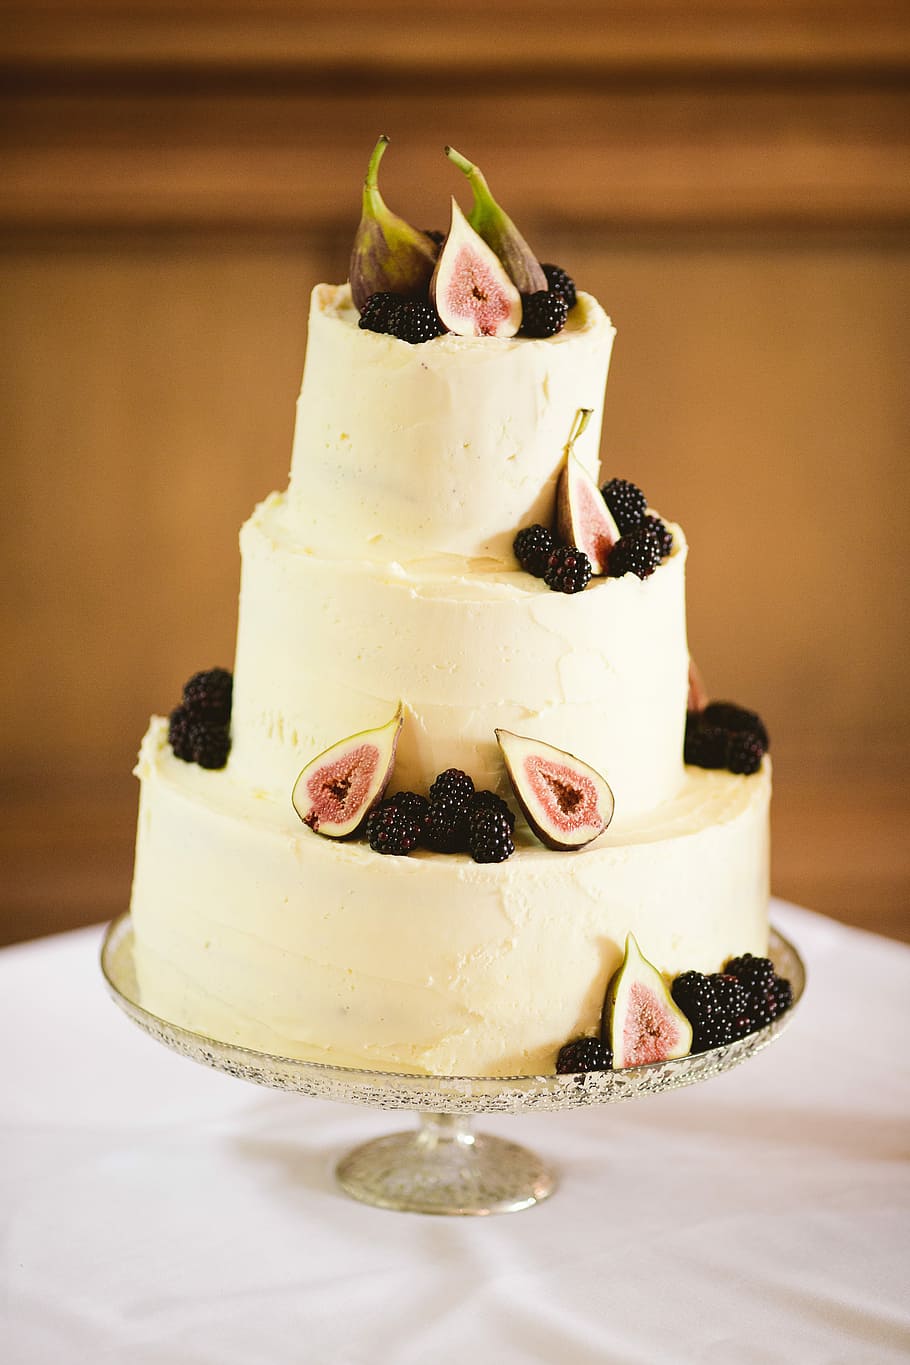 dragon fruit cake on top of table, white 3-layer cake, figs, blackberry